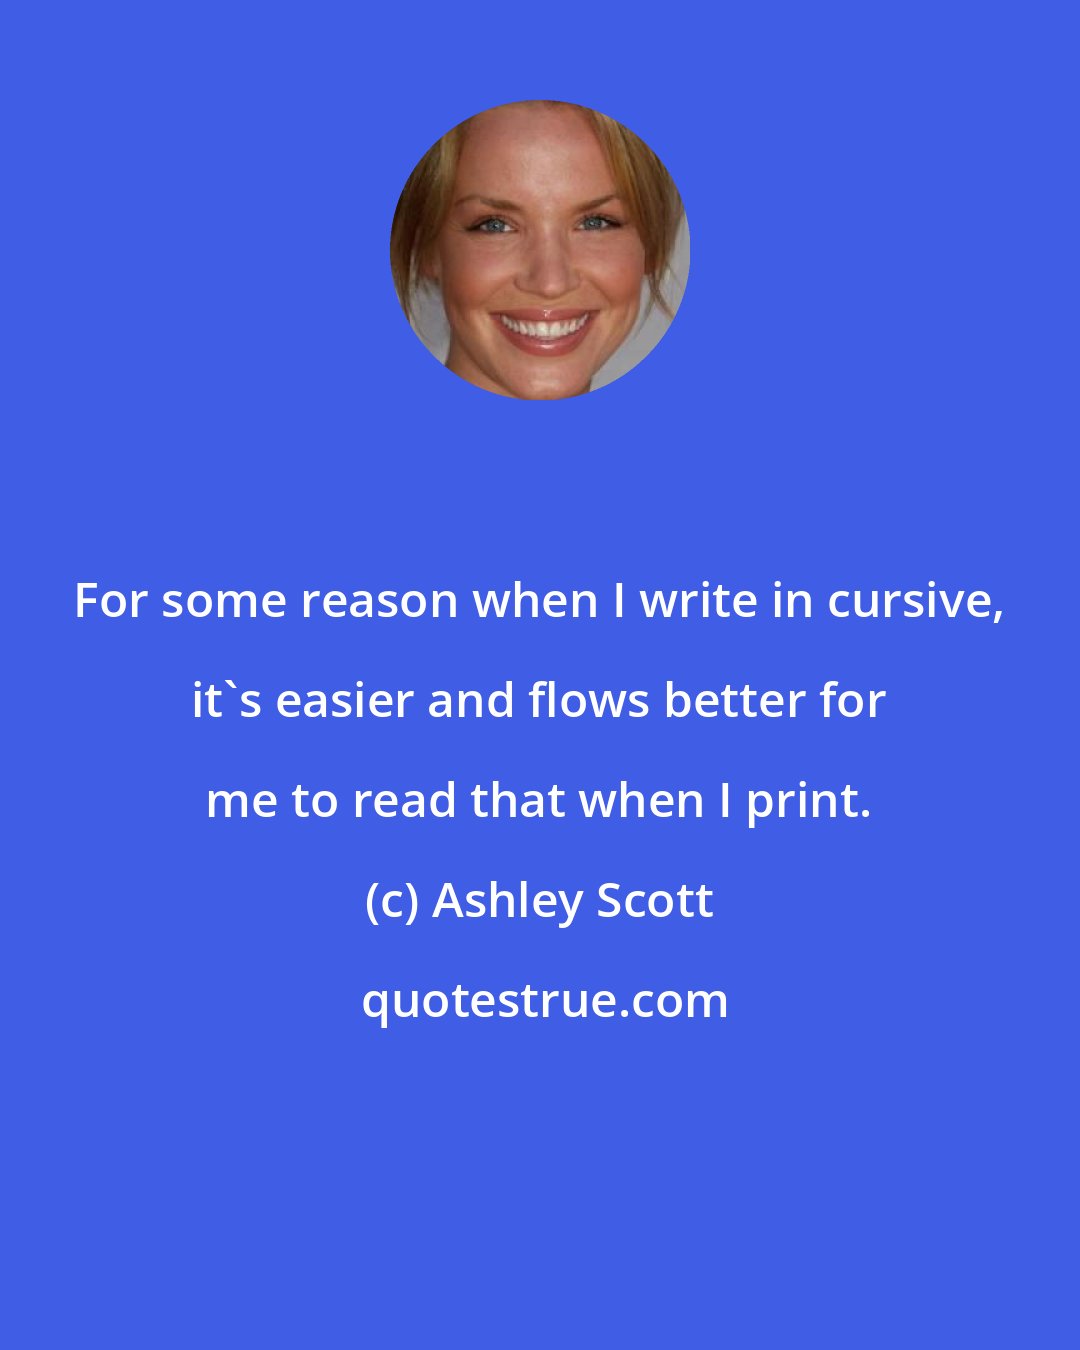 Ashley Scott: For some reason when I write in cursive, it's easier and flows better for me to read that when I print.